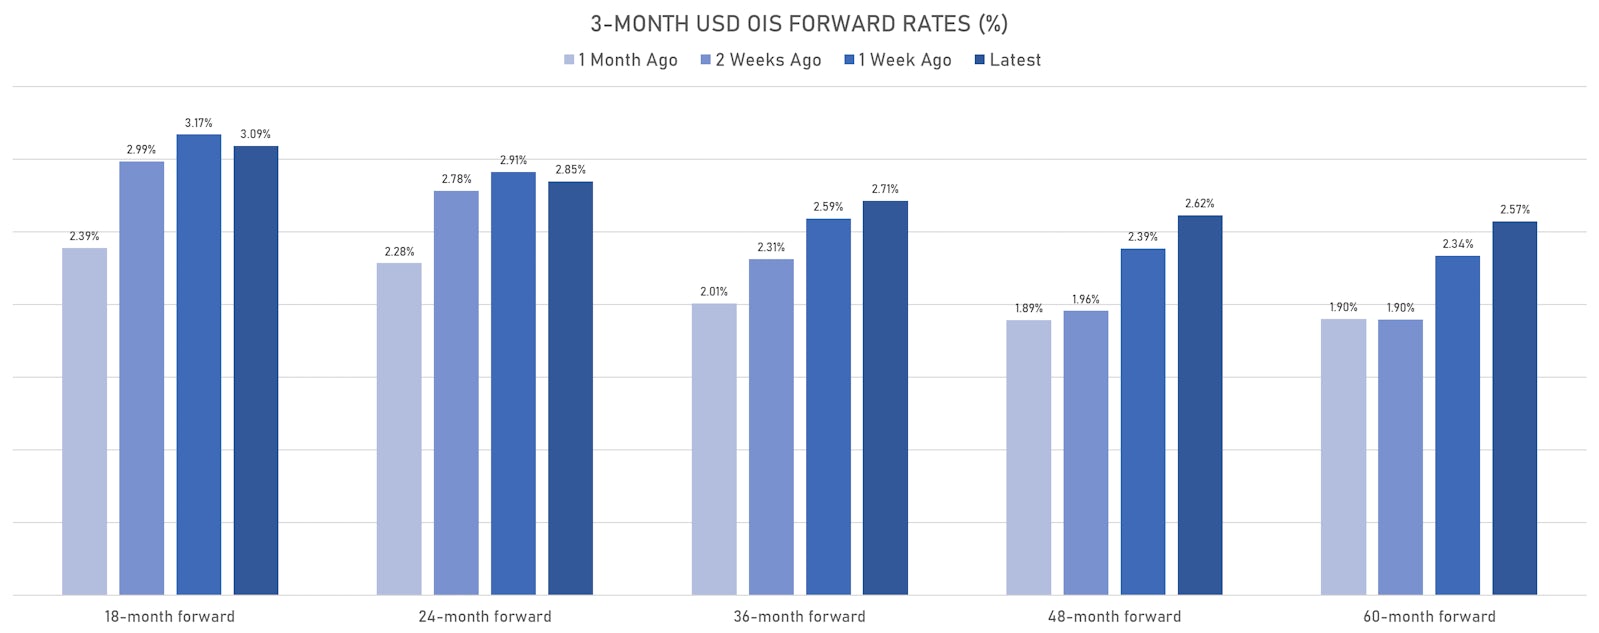 Recent Changes Of 3-Month USD OIS Forward Rates | Sources: ϕpost, Refinitiv data